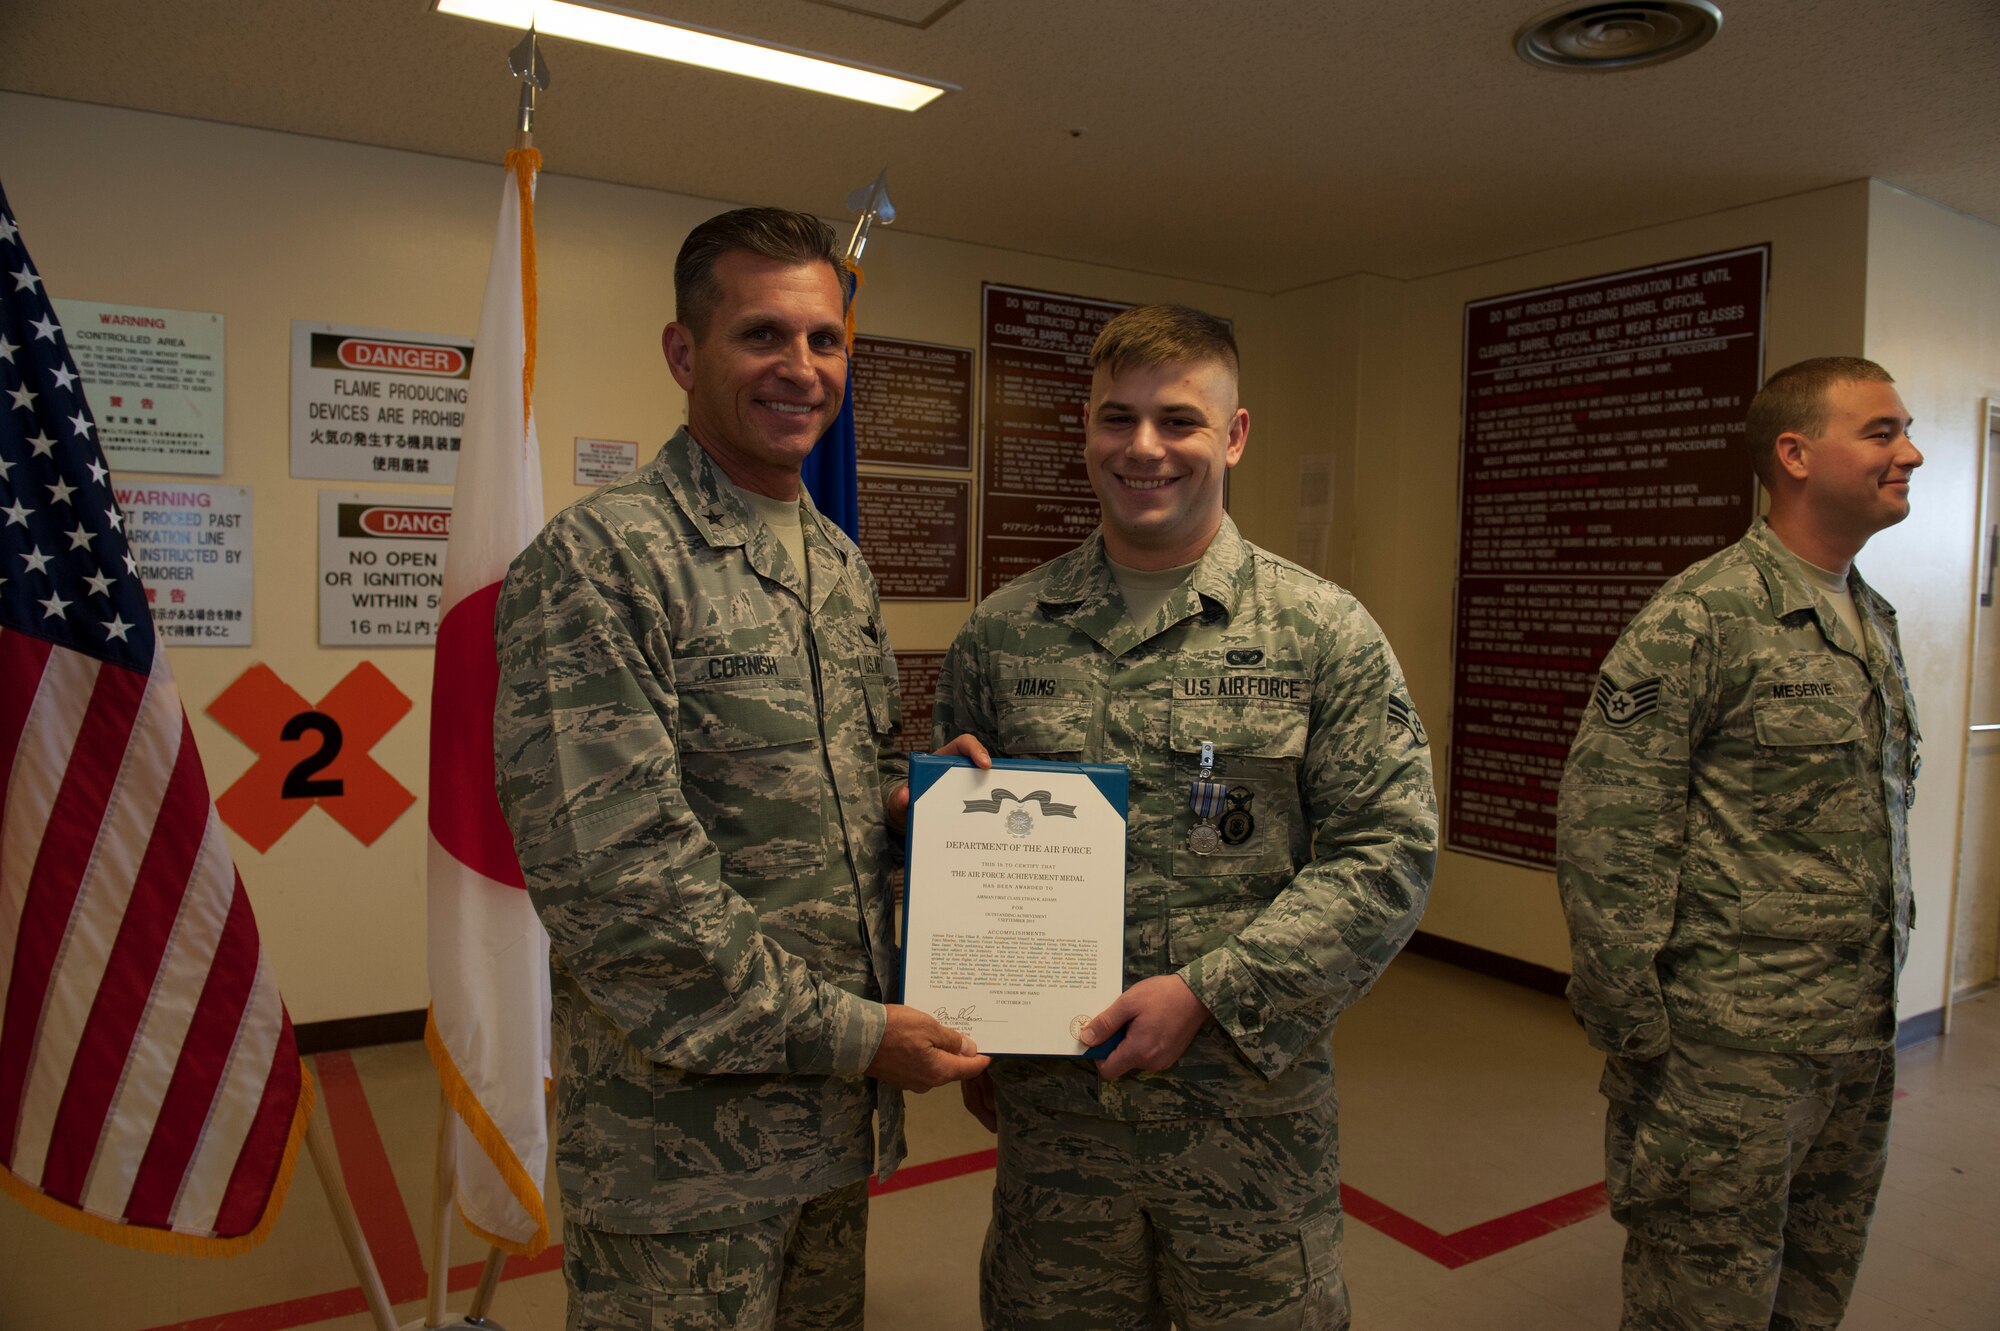 U.S. Air Force Brig. Gen. Barry Cornish, 18th Wing commander, presents Airman 1st Class Ethan Adams, 18th Security Forces Squadron response force member, with a certificate to accompany the Air Force Achievement Medal Nov. 4, 2015, at Kadena Air Base, Japan.  Adams was recognized for saving the life of an Airman who attempted suicide. (U.S. Air Force photo by Airman 1st Class Lynette M. Rolen)